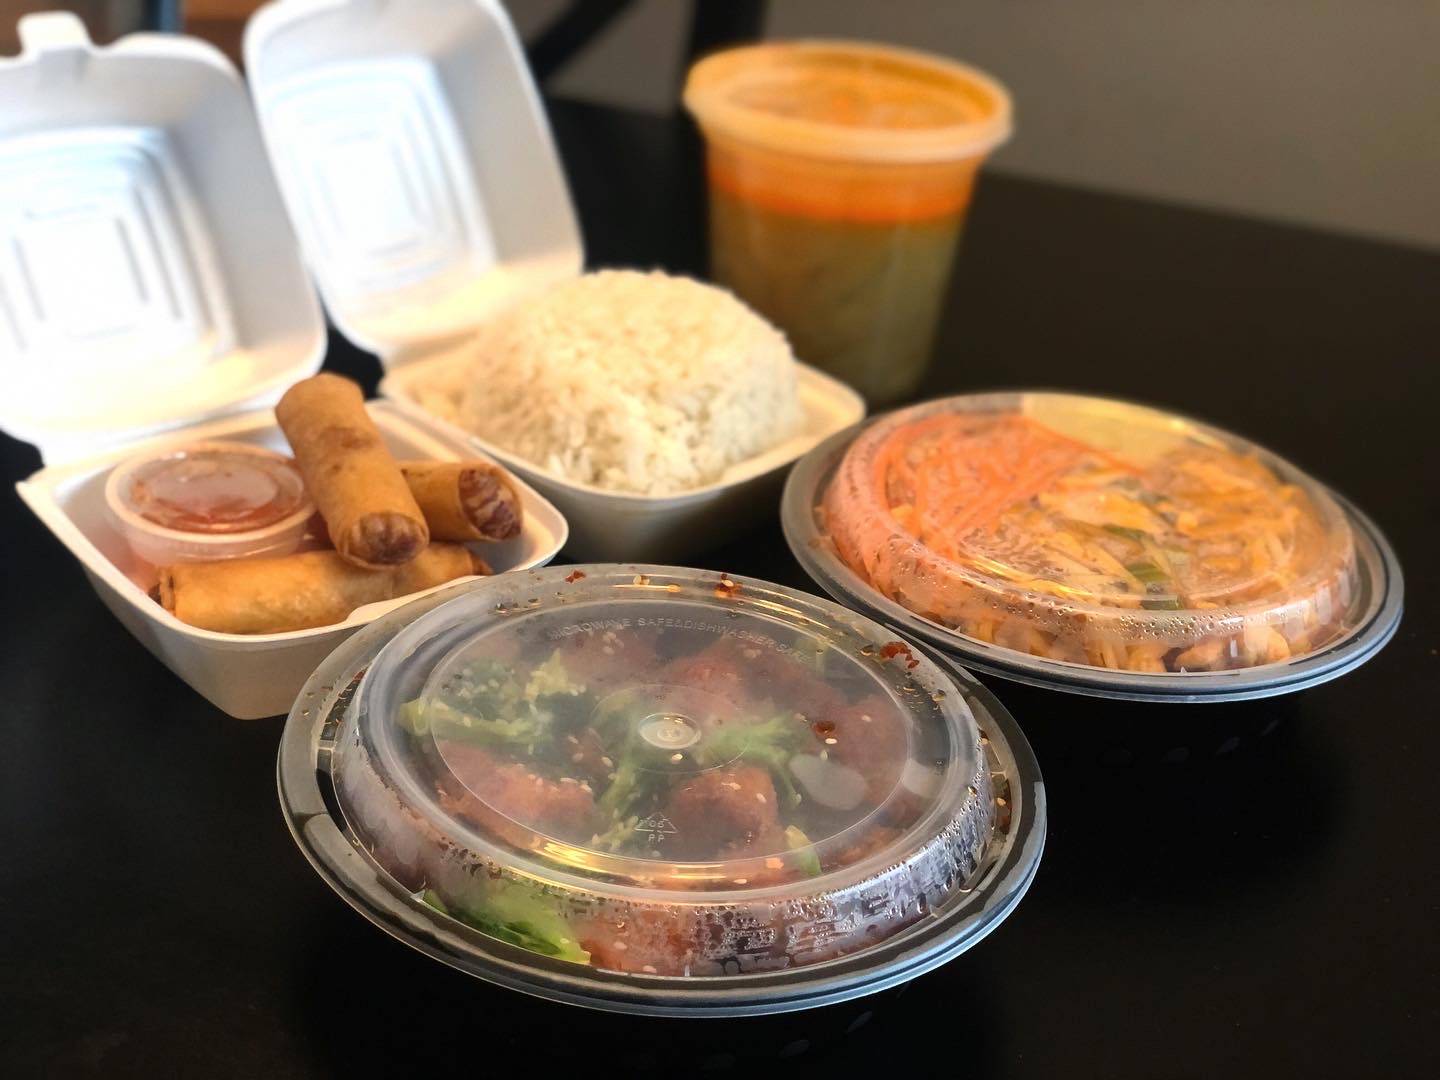 Two small styrofoam containers are open: eggrolls in one and white rice in the other. Two circle containers are closed with pad thai and sesame chicken. There is a tall, plastic cylindrical container holding yellow curry on a black table. Photo by Alyssa Buckley.